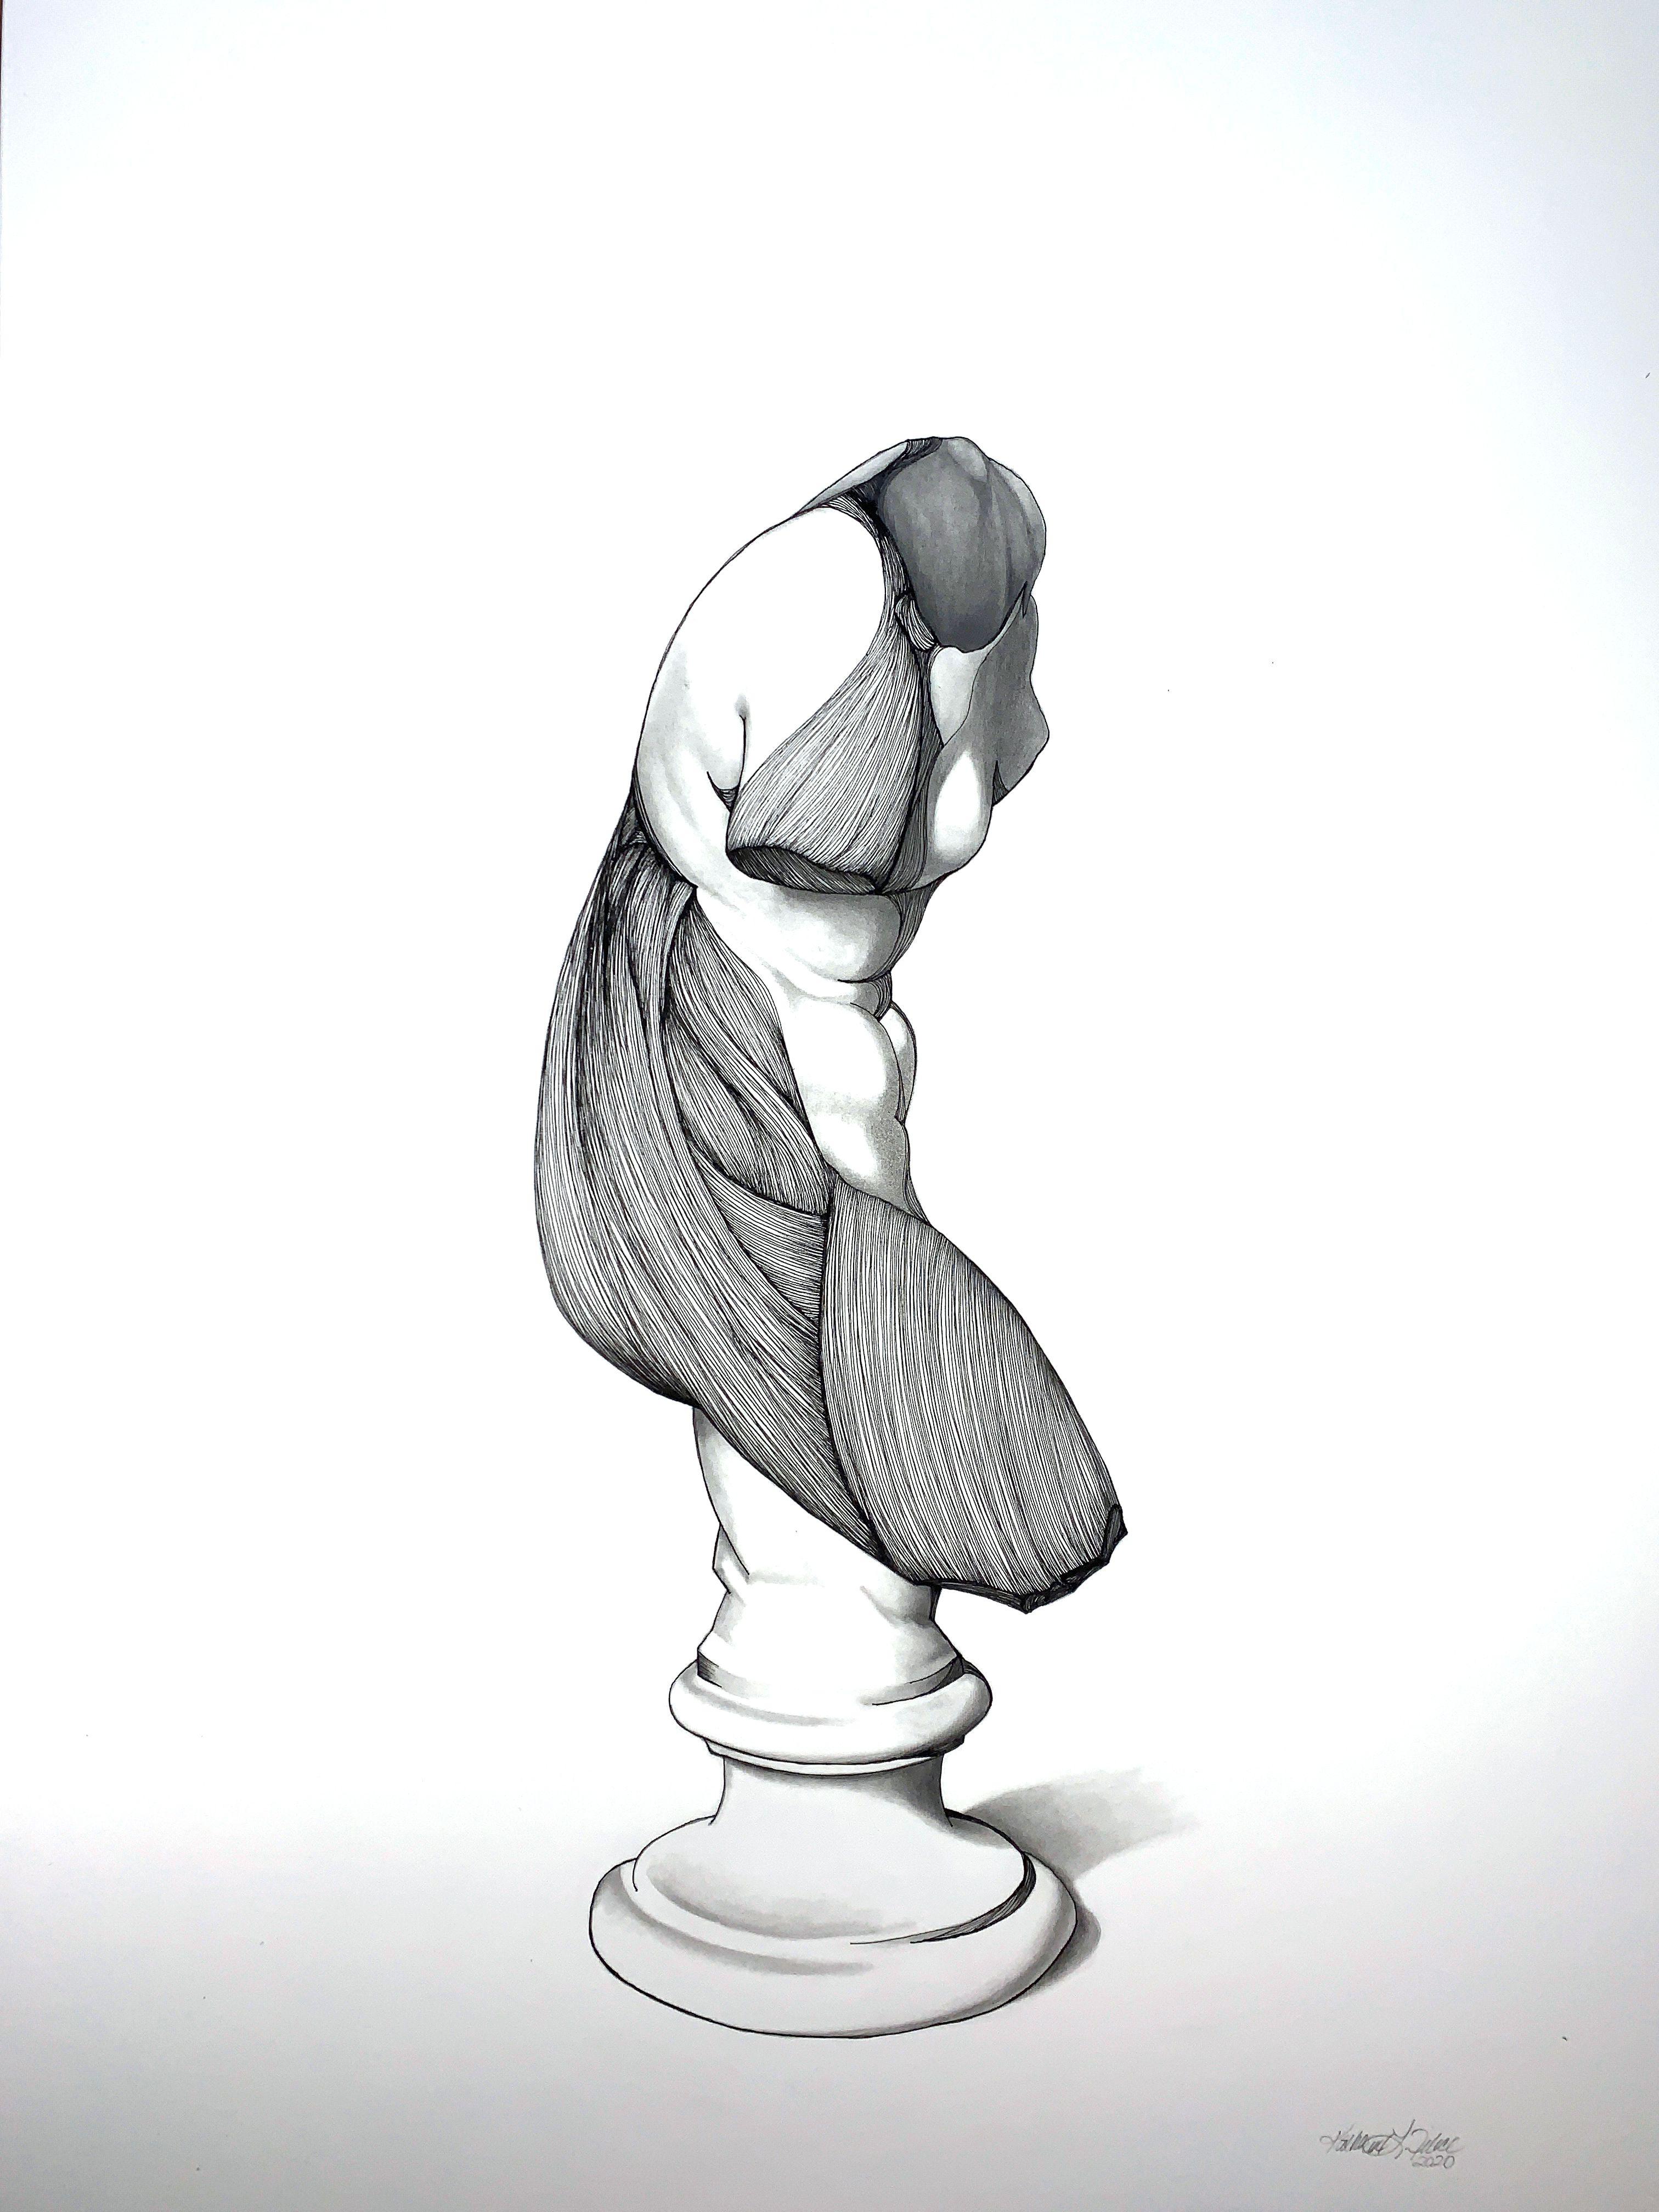 Unveiling IV - Contemporary Figurative Study in Pen + Ink + Graphite Academic - Art by Katherine Filice